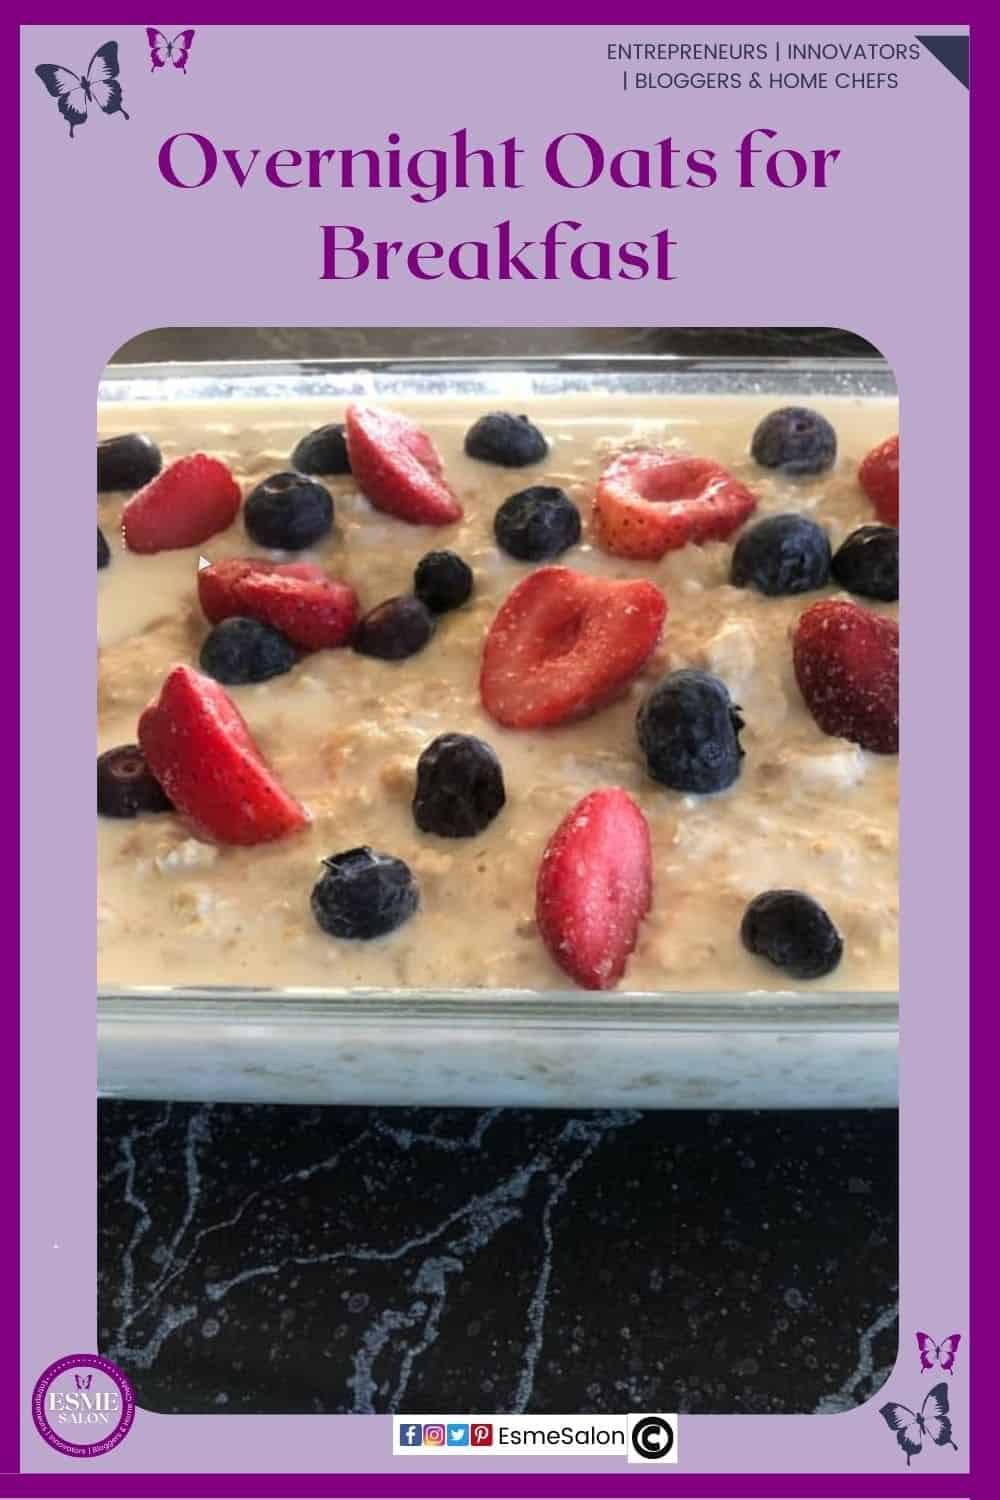 an image of Overnight Oats for Breakfast in a rectangular glass dish and topped with strawberries and black/blueberries